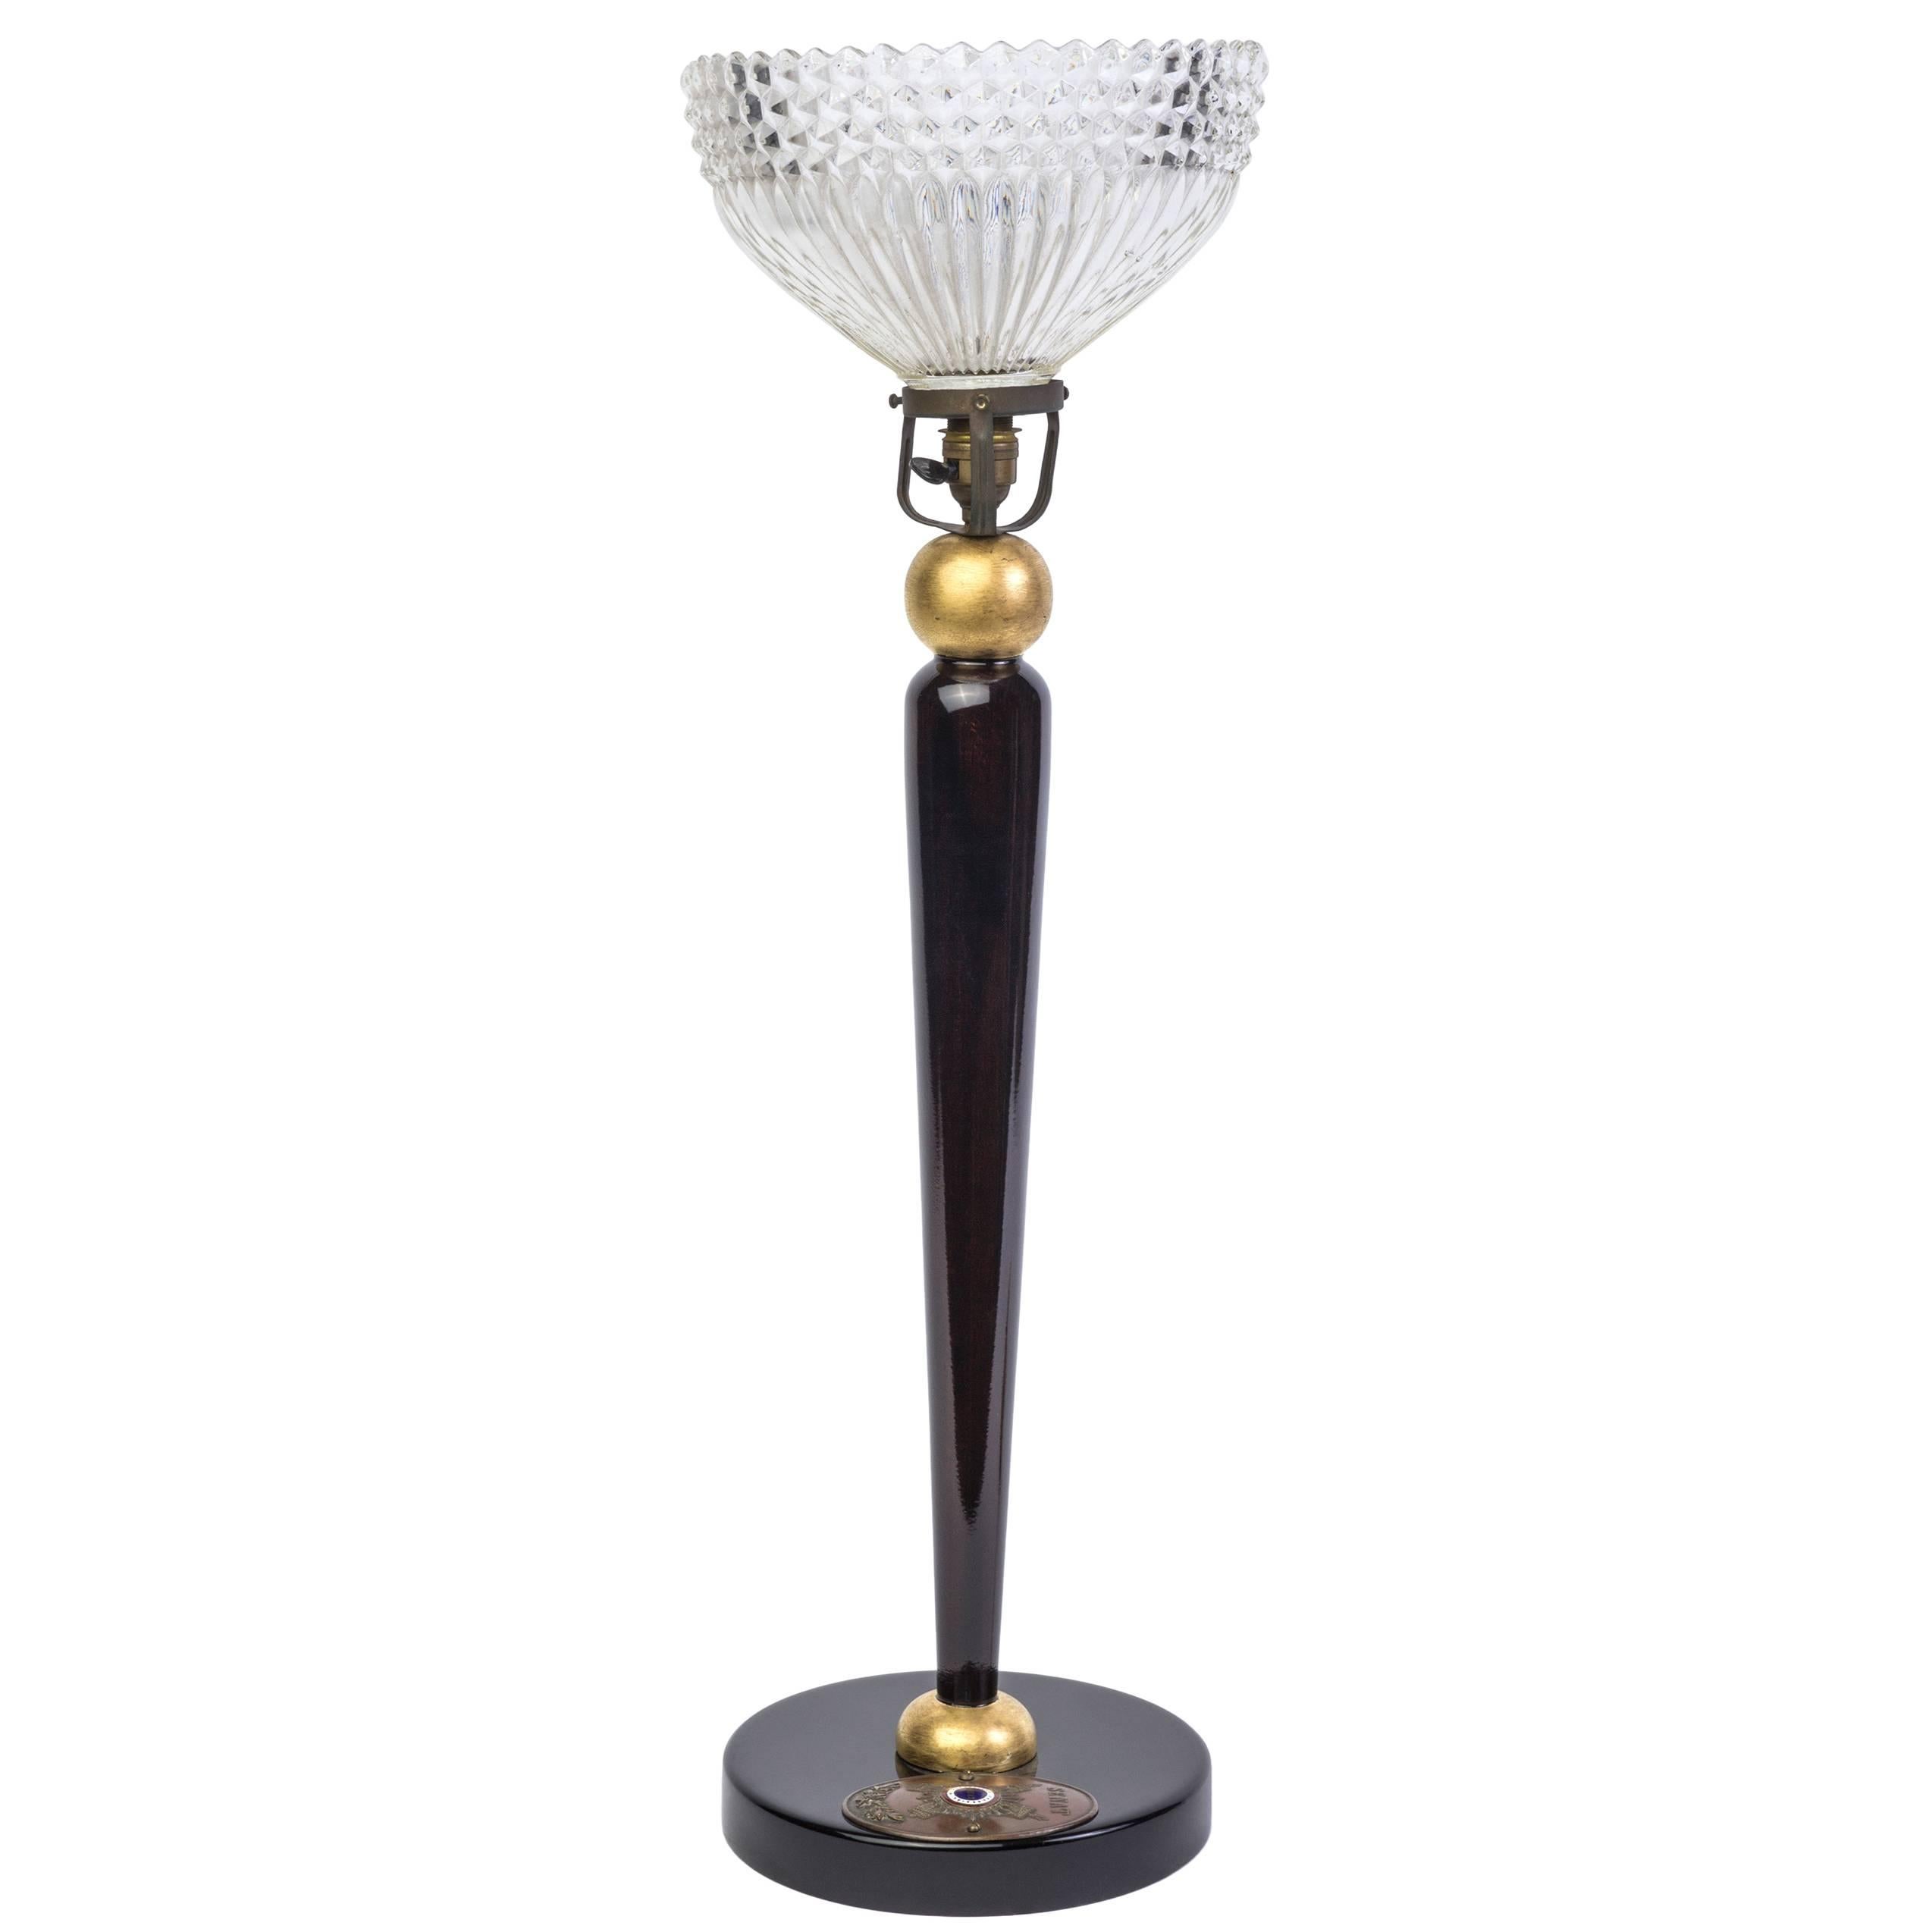 Pre-War French Art Deco Table Lamp